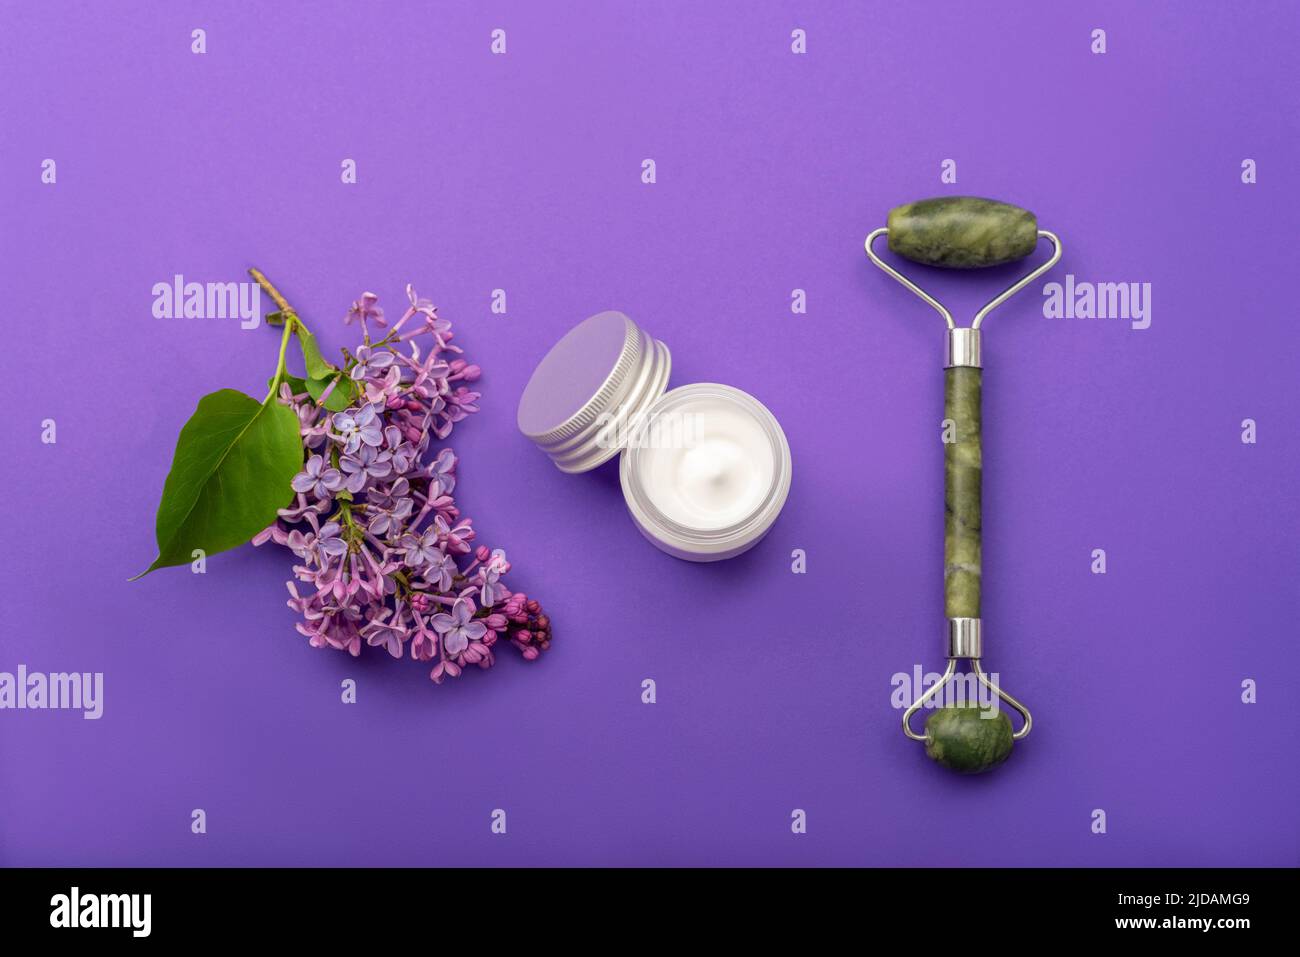 Jade facial roller, cream jar and lilac flower on purple background. Natural cosmetics, skin care concept. Top view, flat lay. Stock Photo